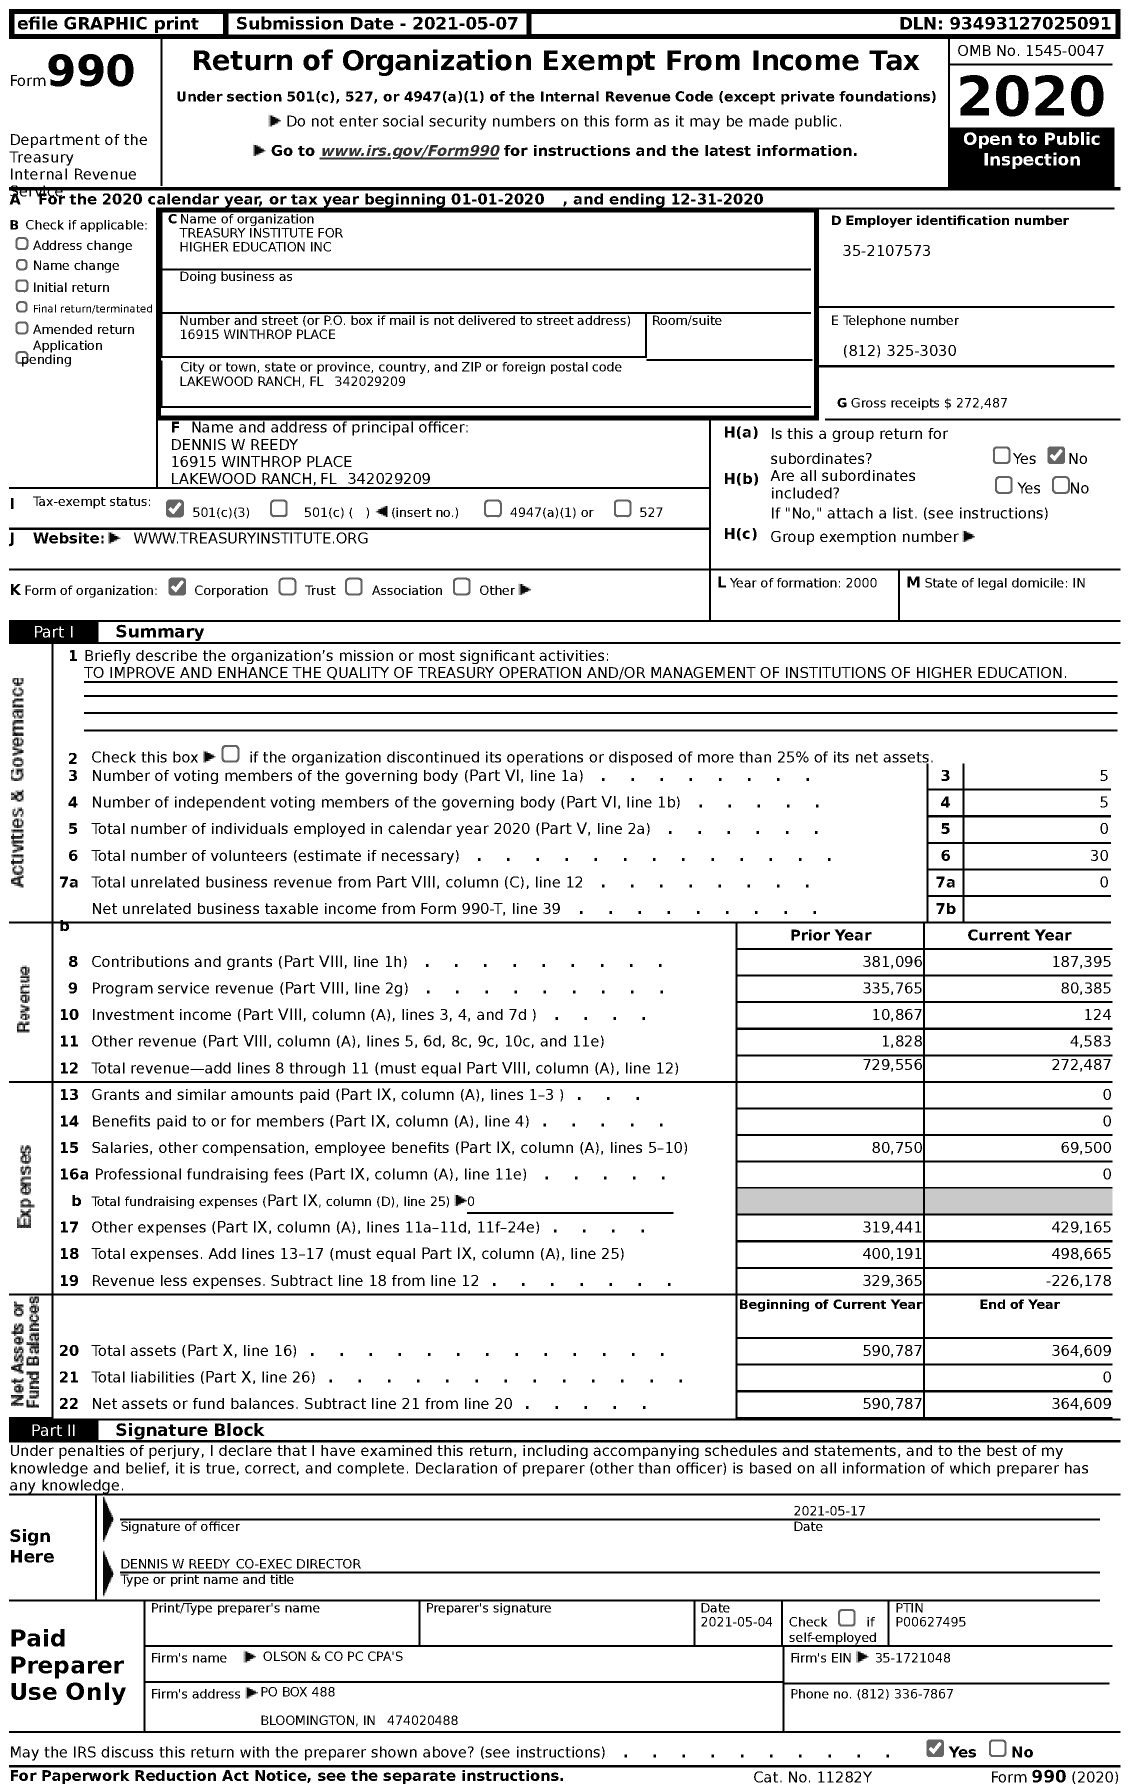 Image of first page of 2020 Form 990 for Treasury Institute for Higher Education